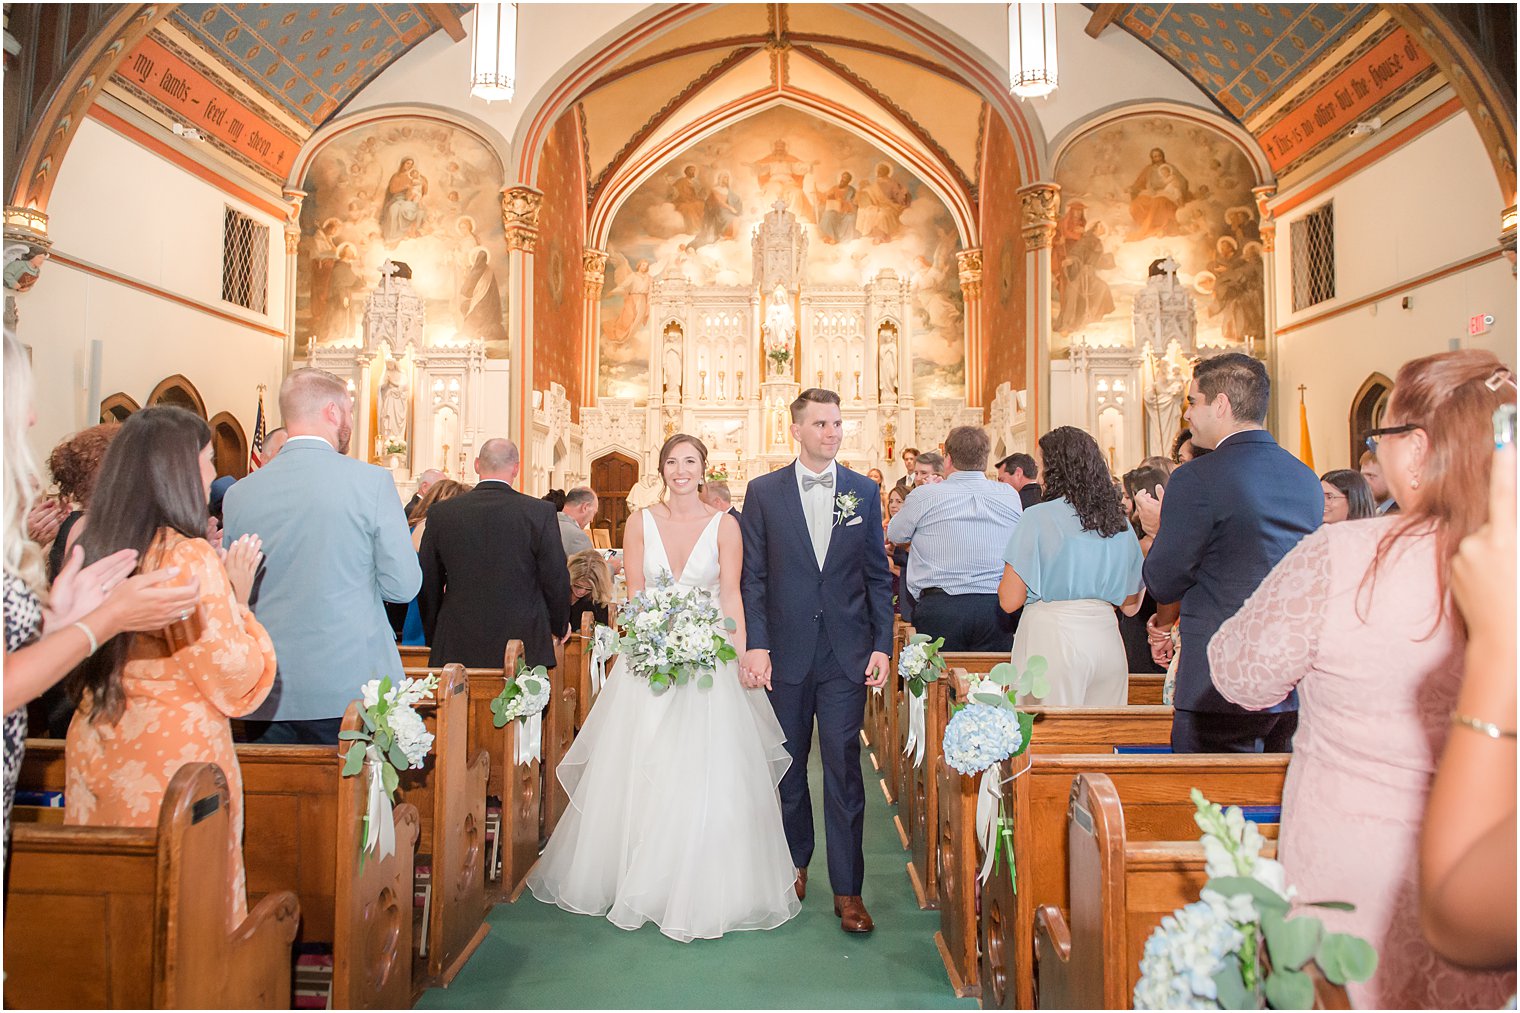 newlyweds walk up aisle after traditional church wedding ceremony at St. Peter's Church